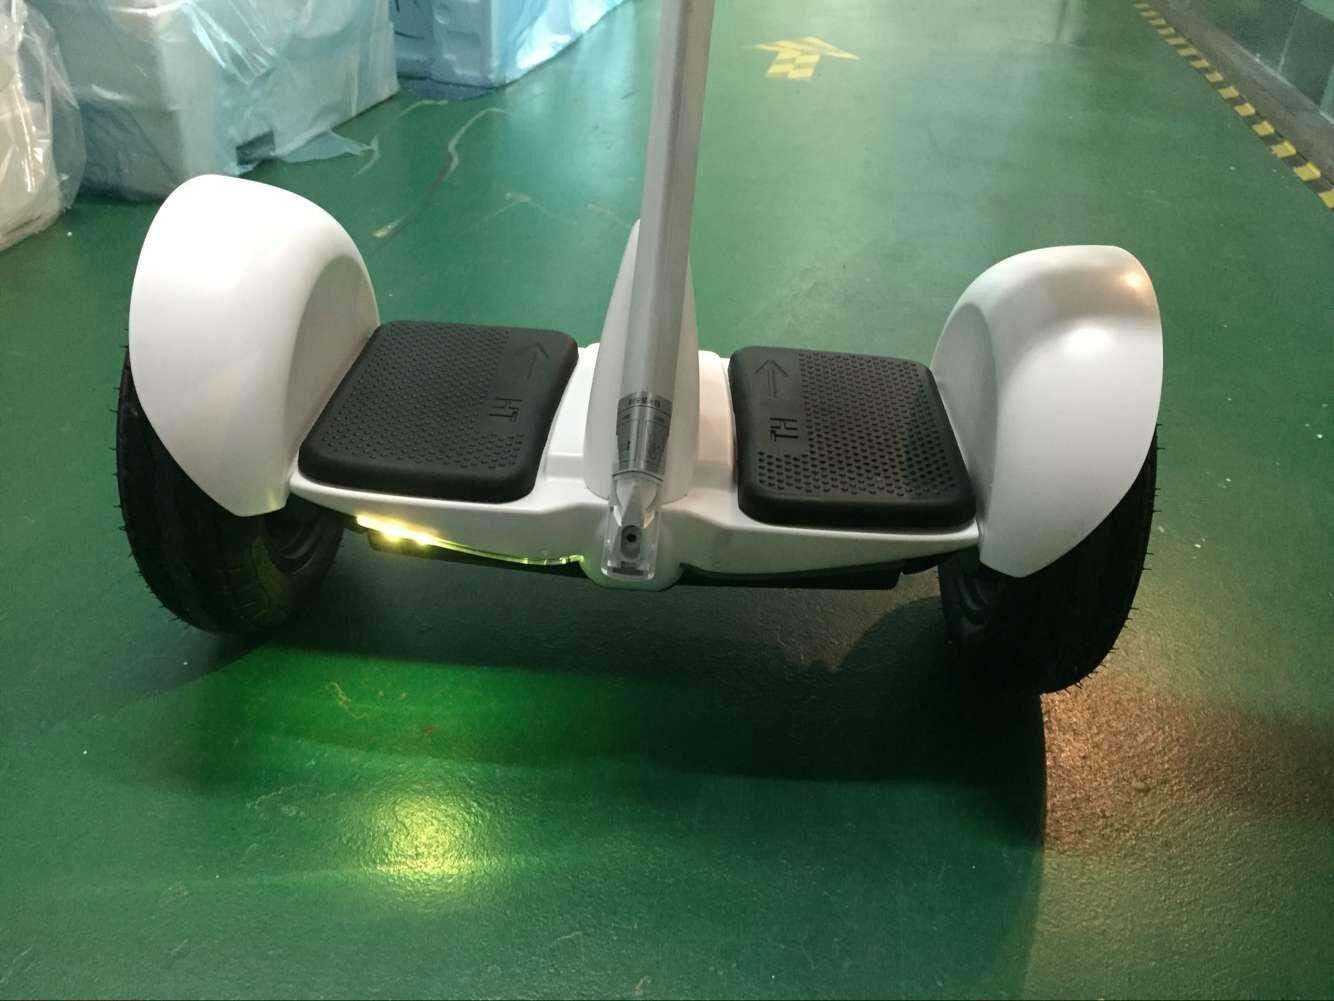 xiaomi NO.9  scooter 10 inch two wheels scooter with smartphone app control 3